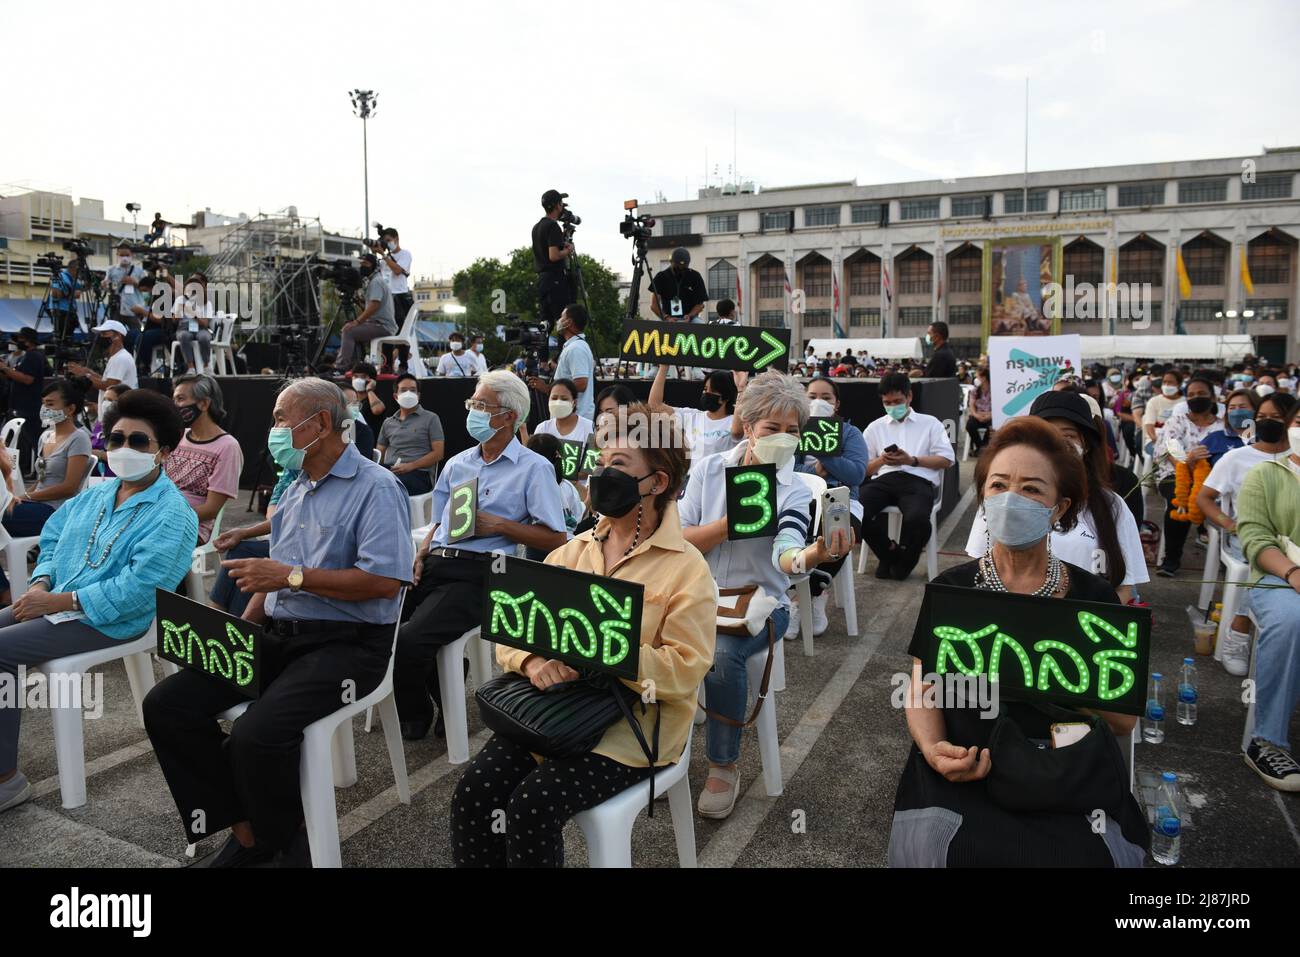 Bangkok, Thailand. 13th May, 2022. people's atmosphere and supporters attended a speech by Sakoltee Phattiyakul, Candidate Bangkok Governor, number 3 at Lan Khon Meaung, front The Bangkok Metropolitan Administration, on May 13, 2022. Credit: ZUMA Press, Inc./Alamy Live News Stock Photo